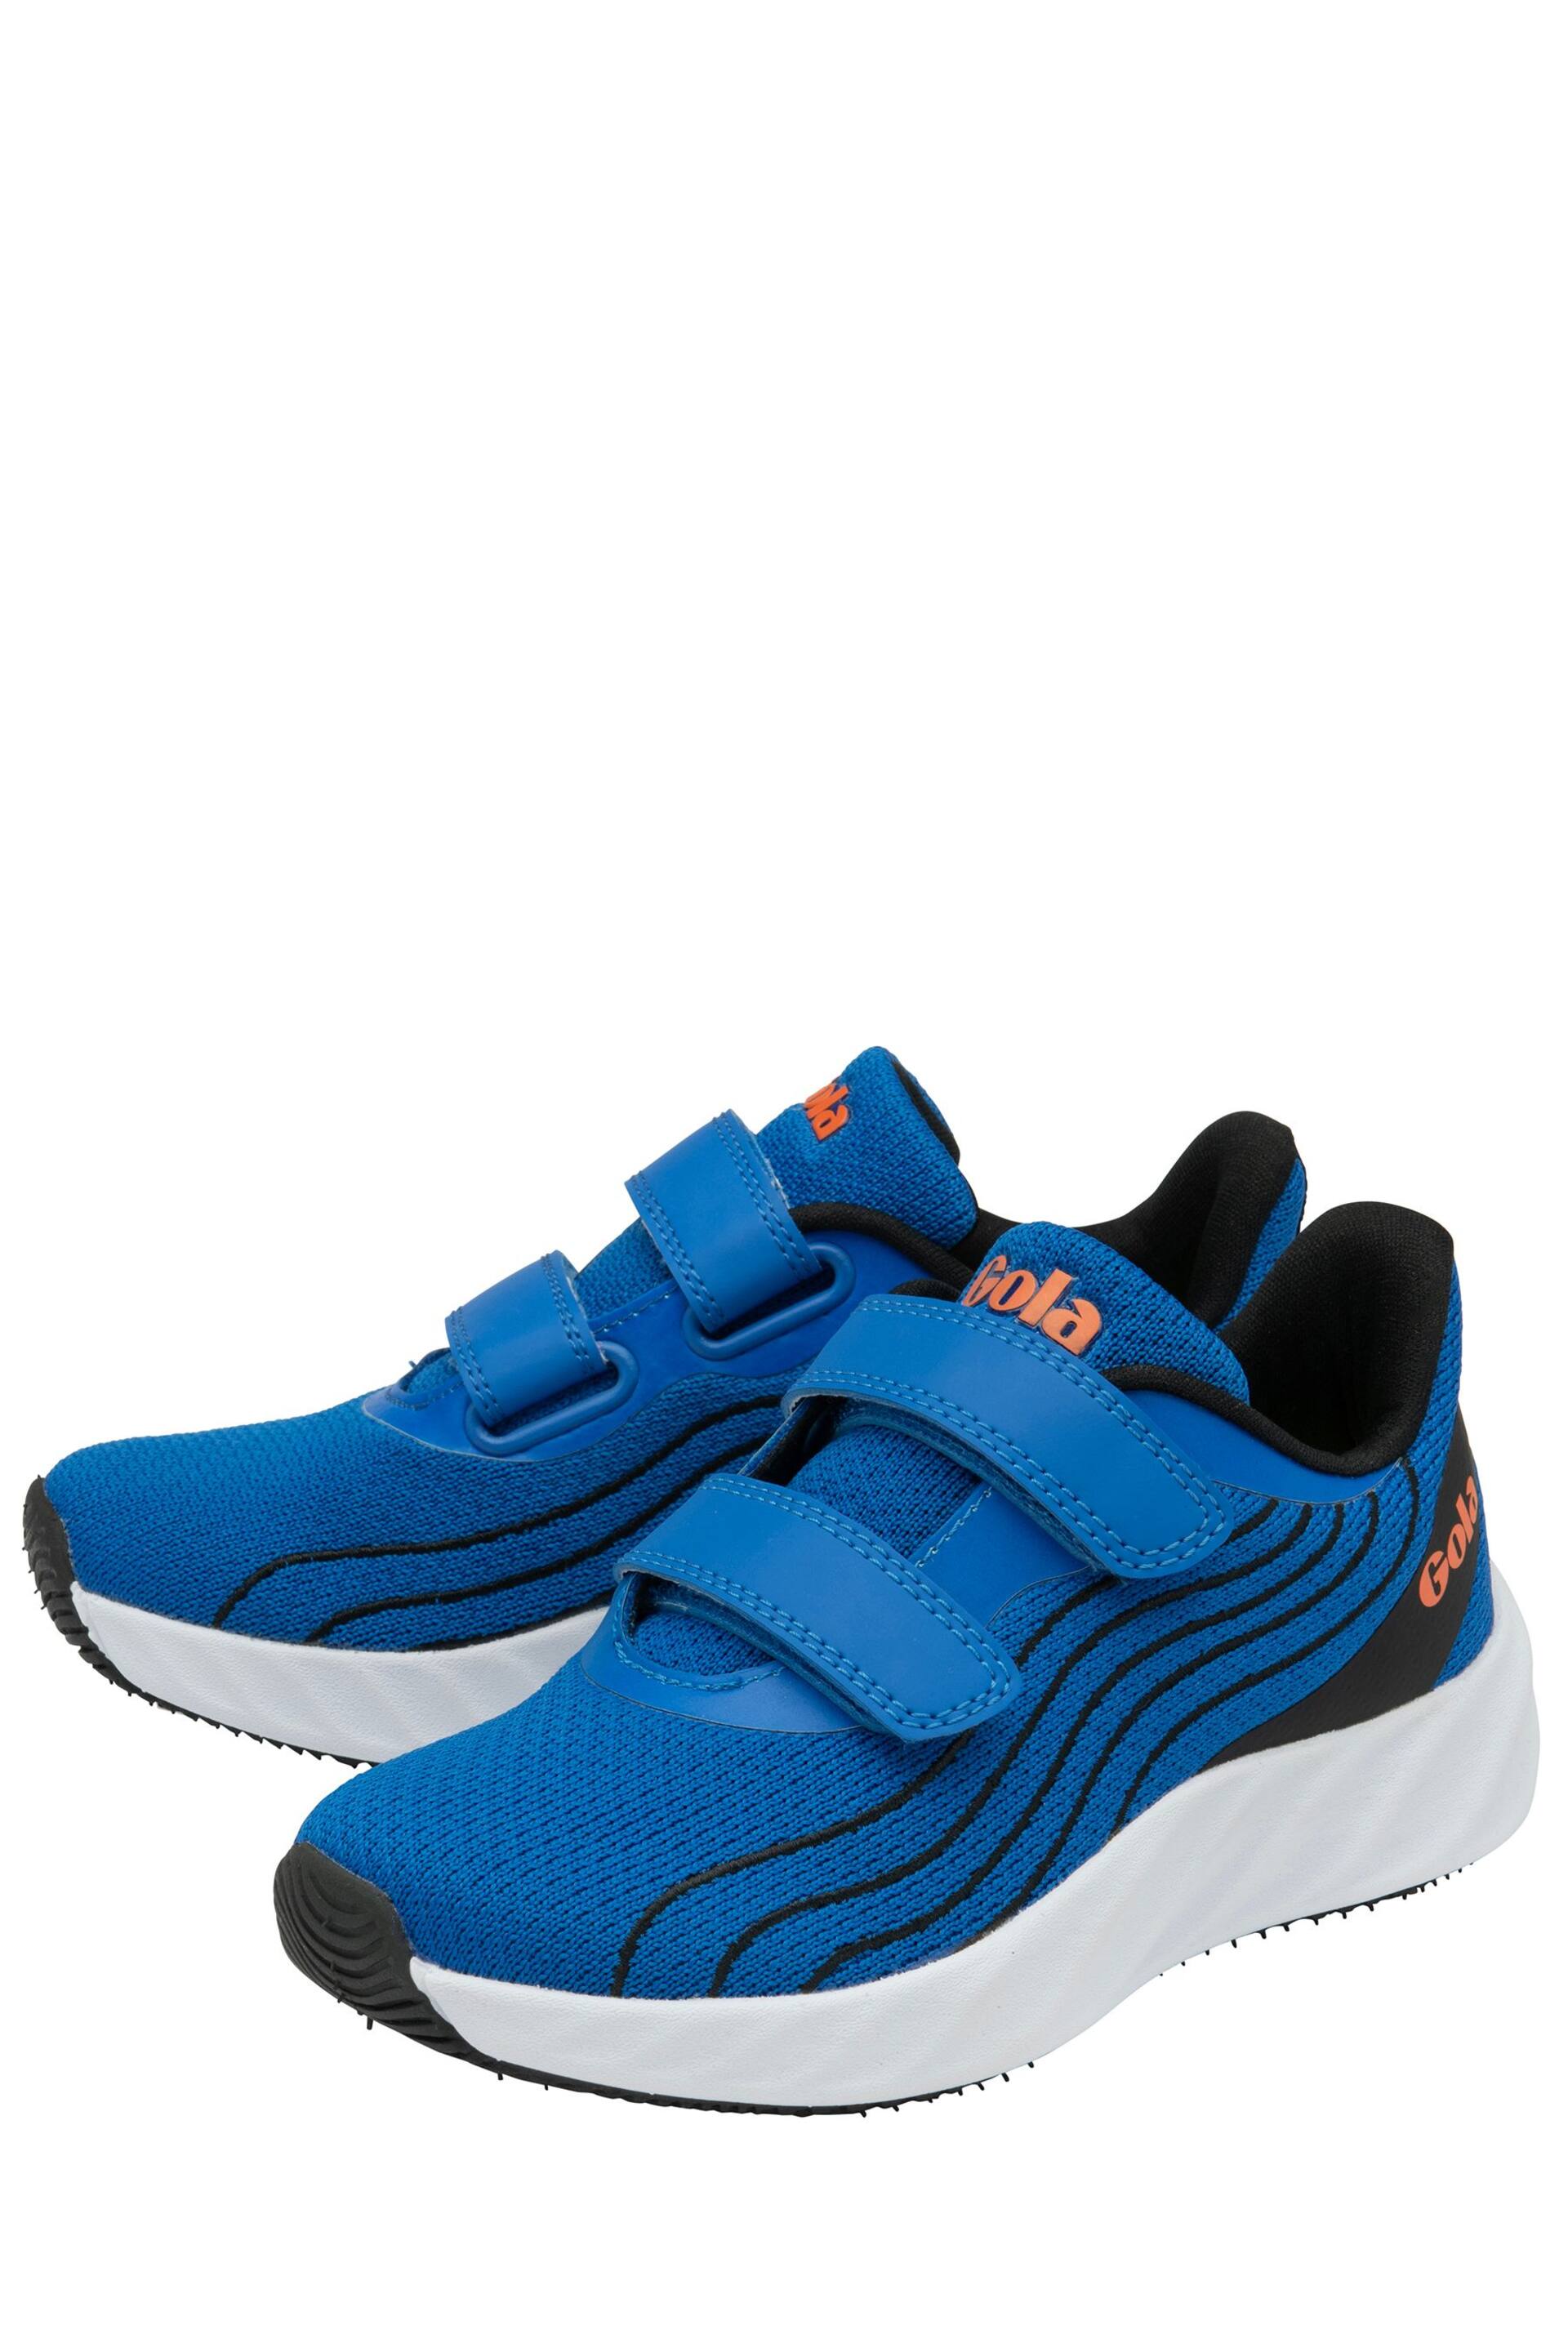 Gola Blue Alzir Twin Bar Quick Fasten Kids Training Trainers - Image 2 of 4